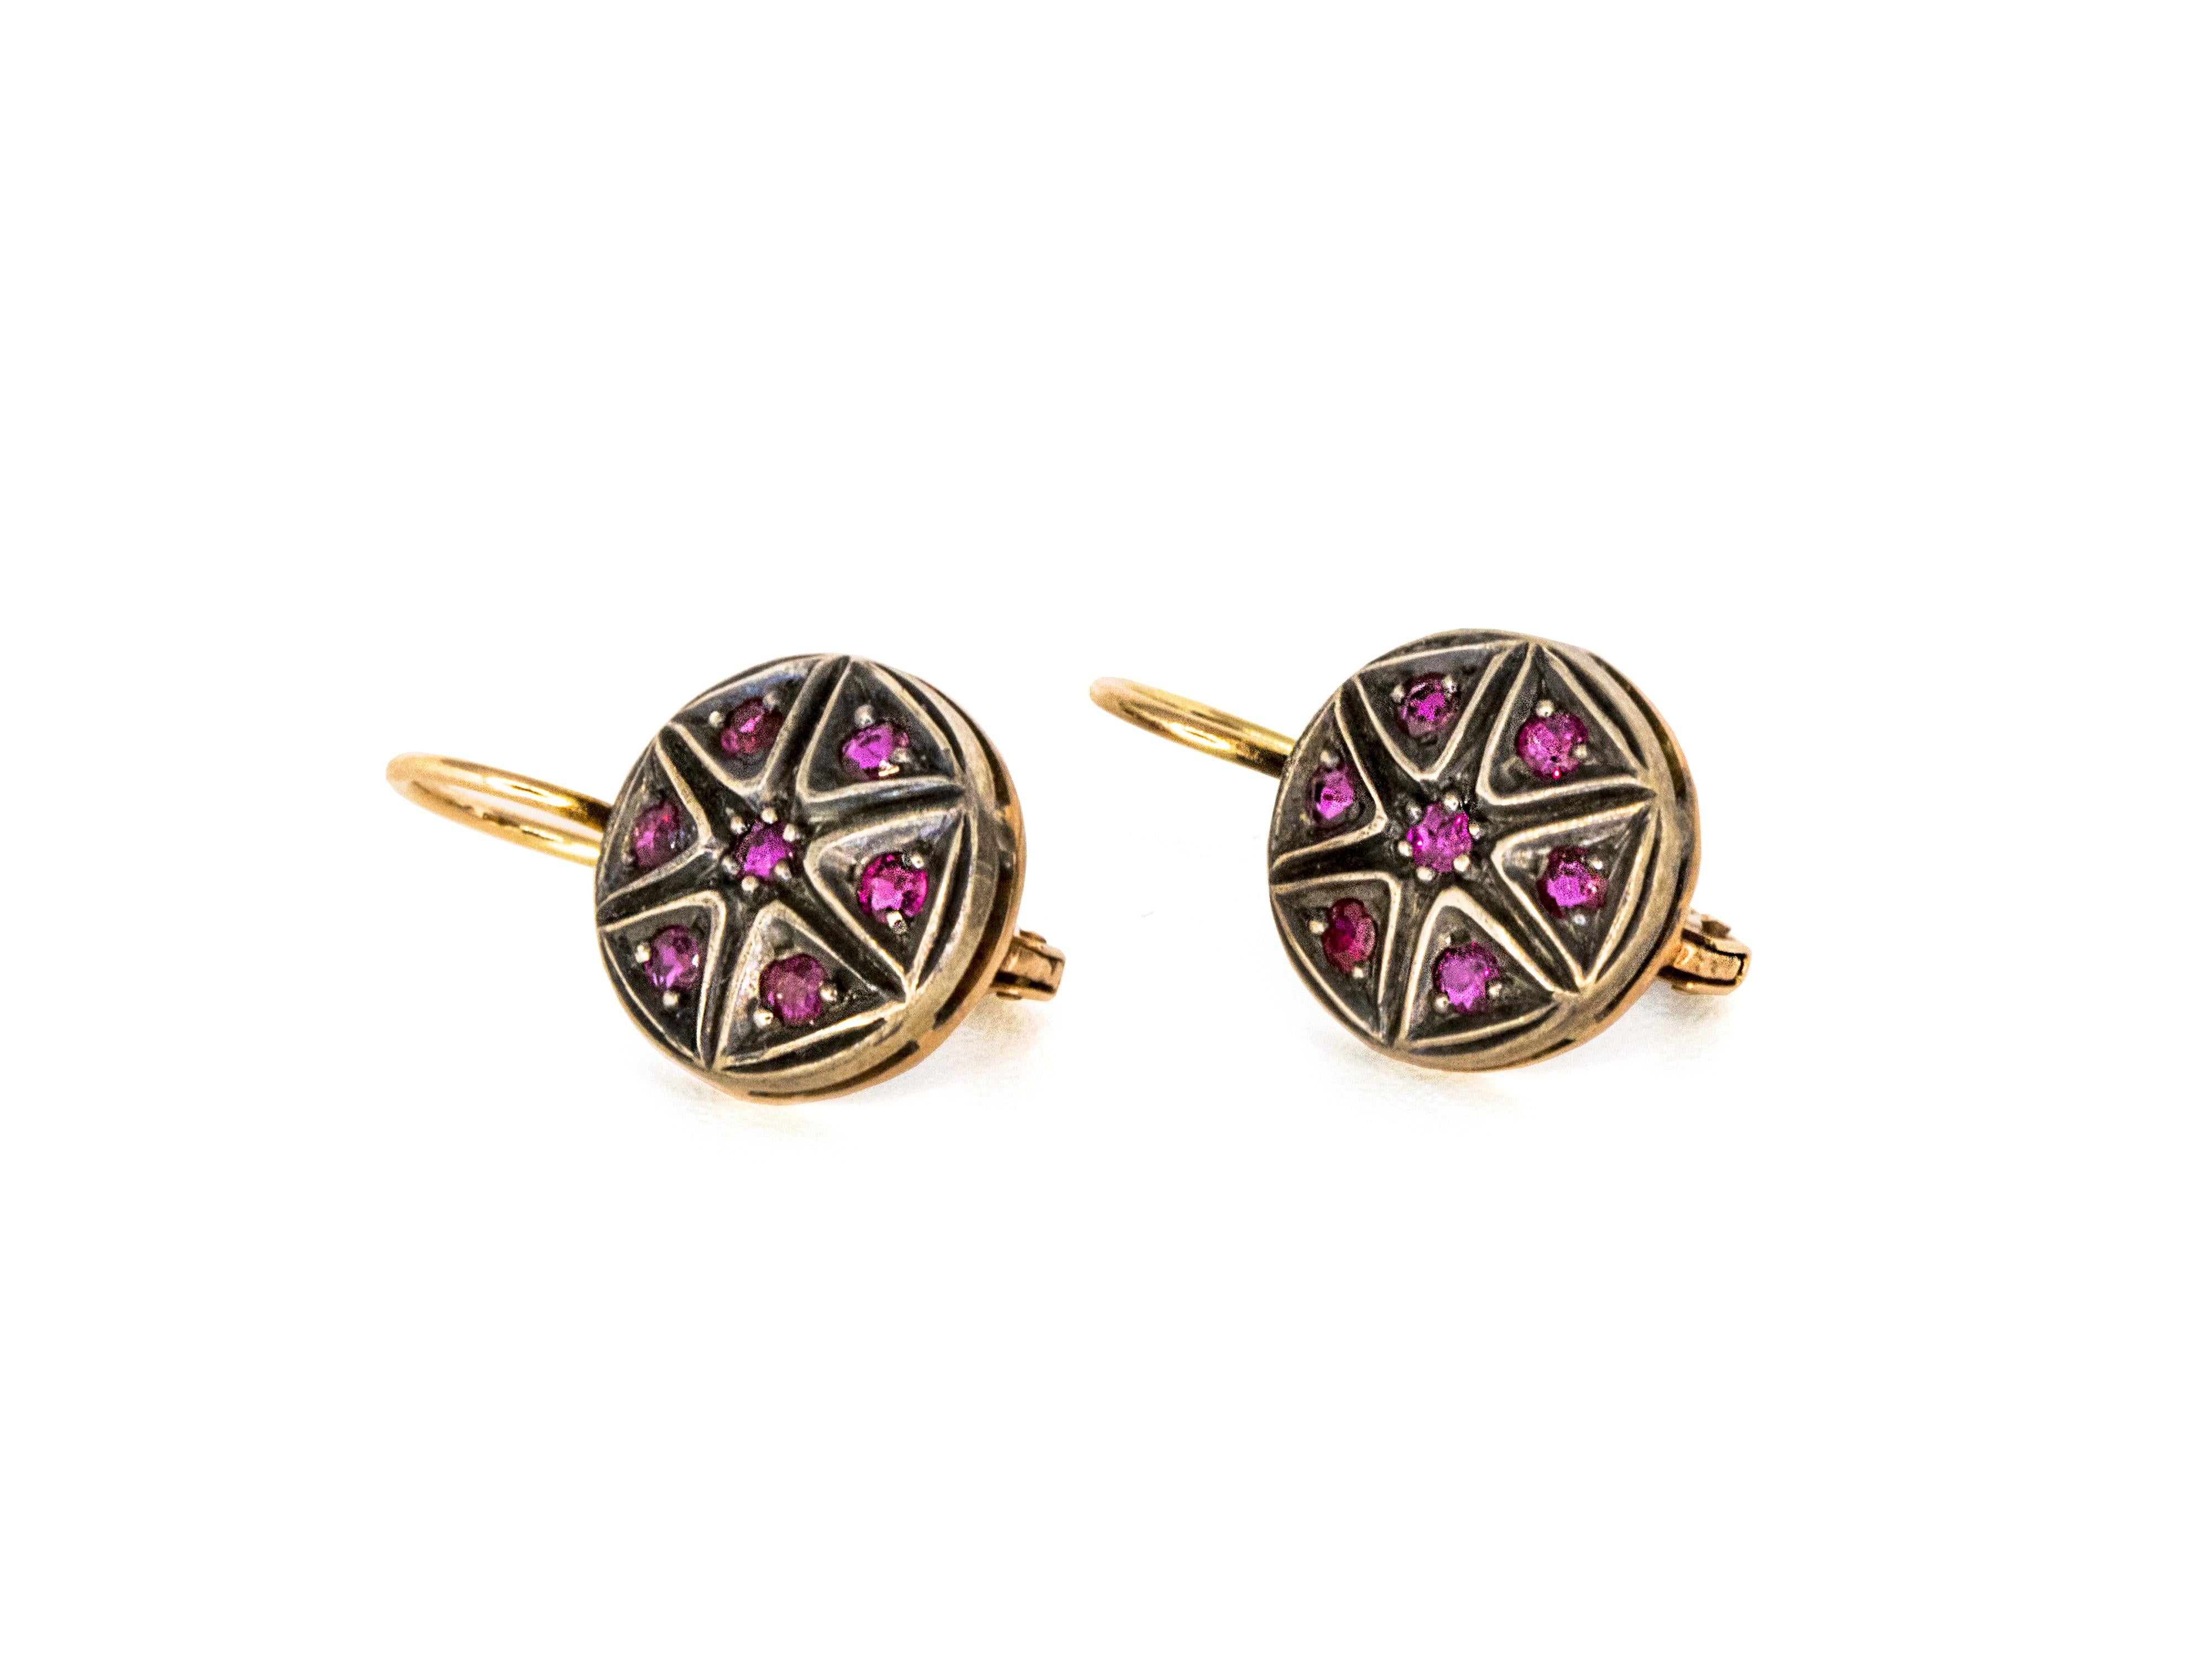 These Victorian era inspiration pair of earrings are crafted in 9 Kt pink gold and topped in sterling silver.
They feature 14brilliant cut Rubies which gave a star pattern design.
The combination of colors gives to these earrings a particular retro